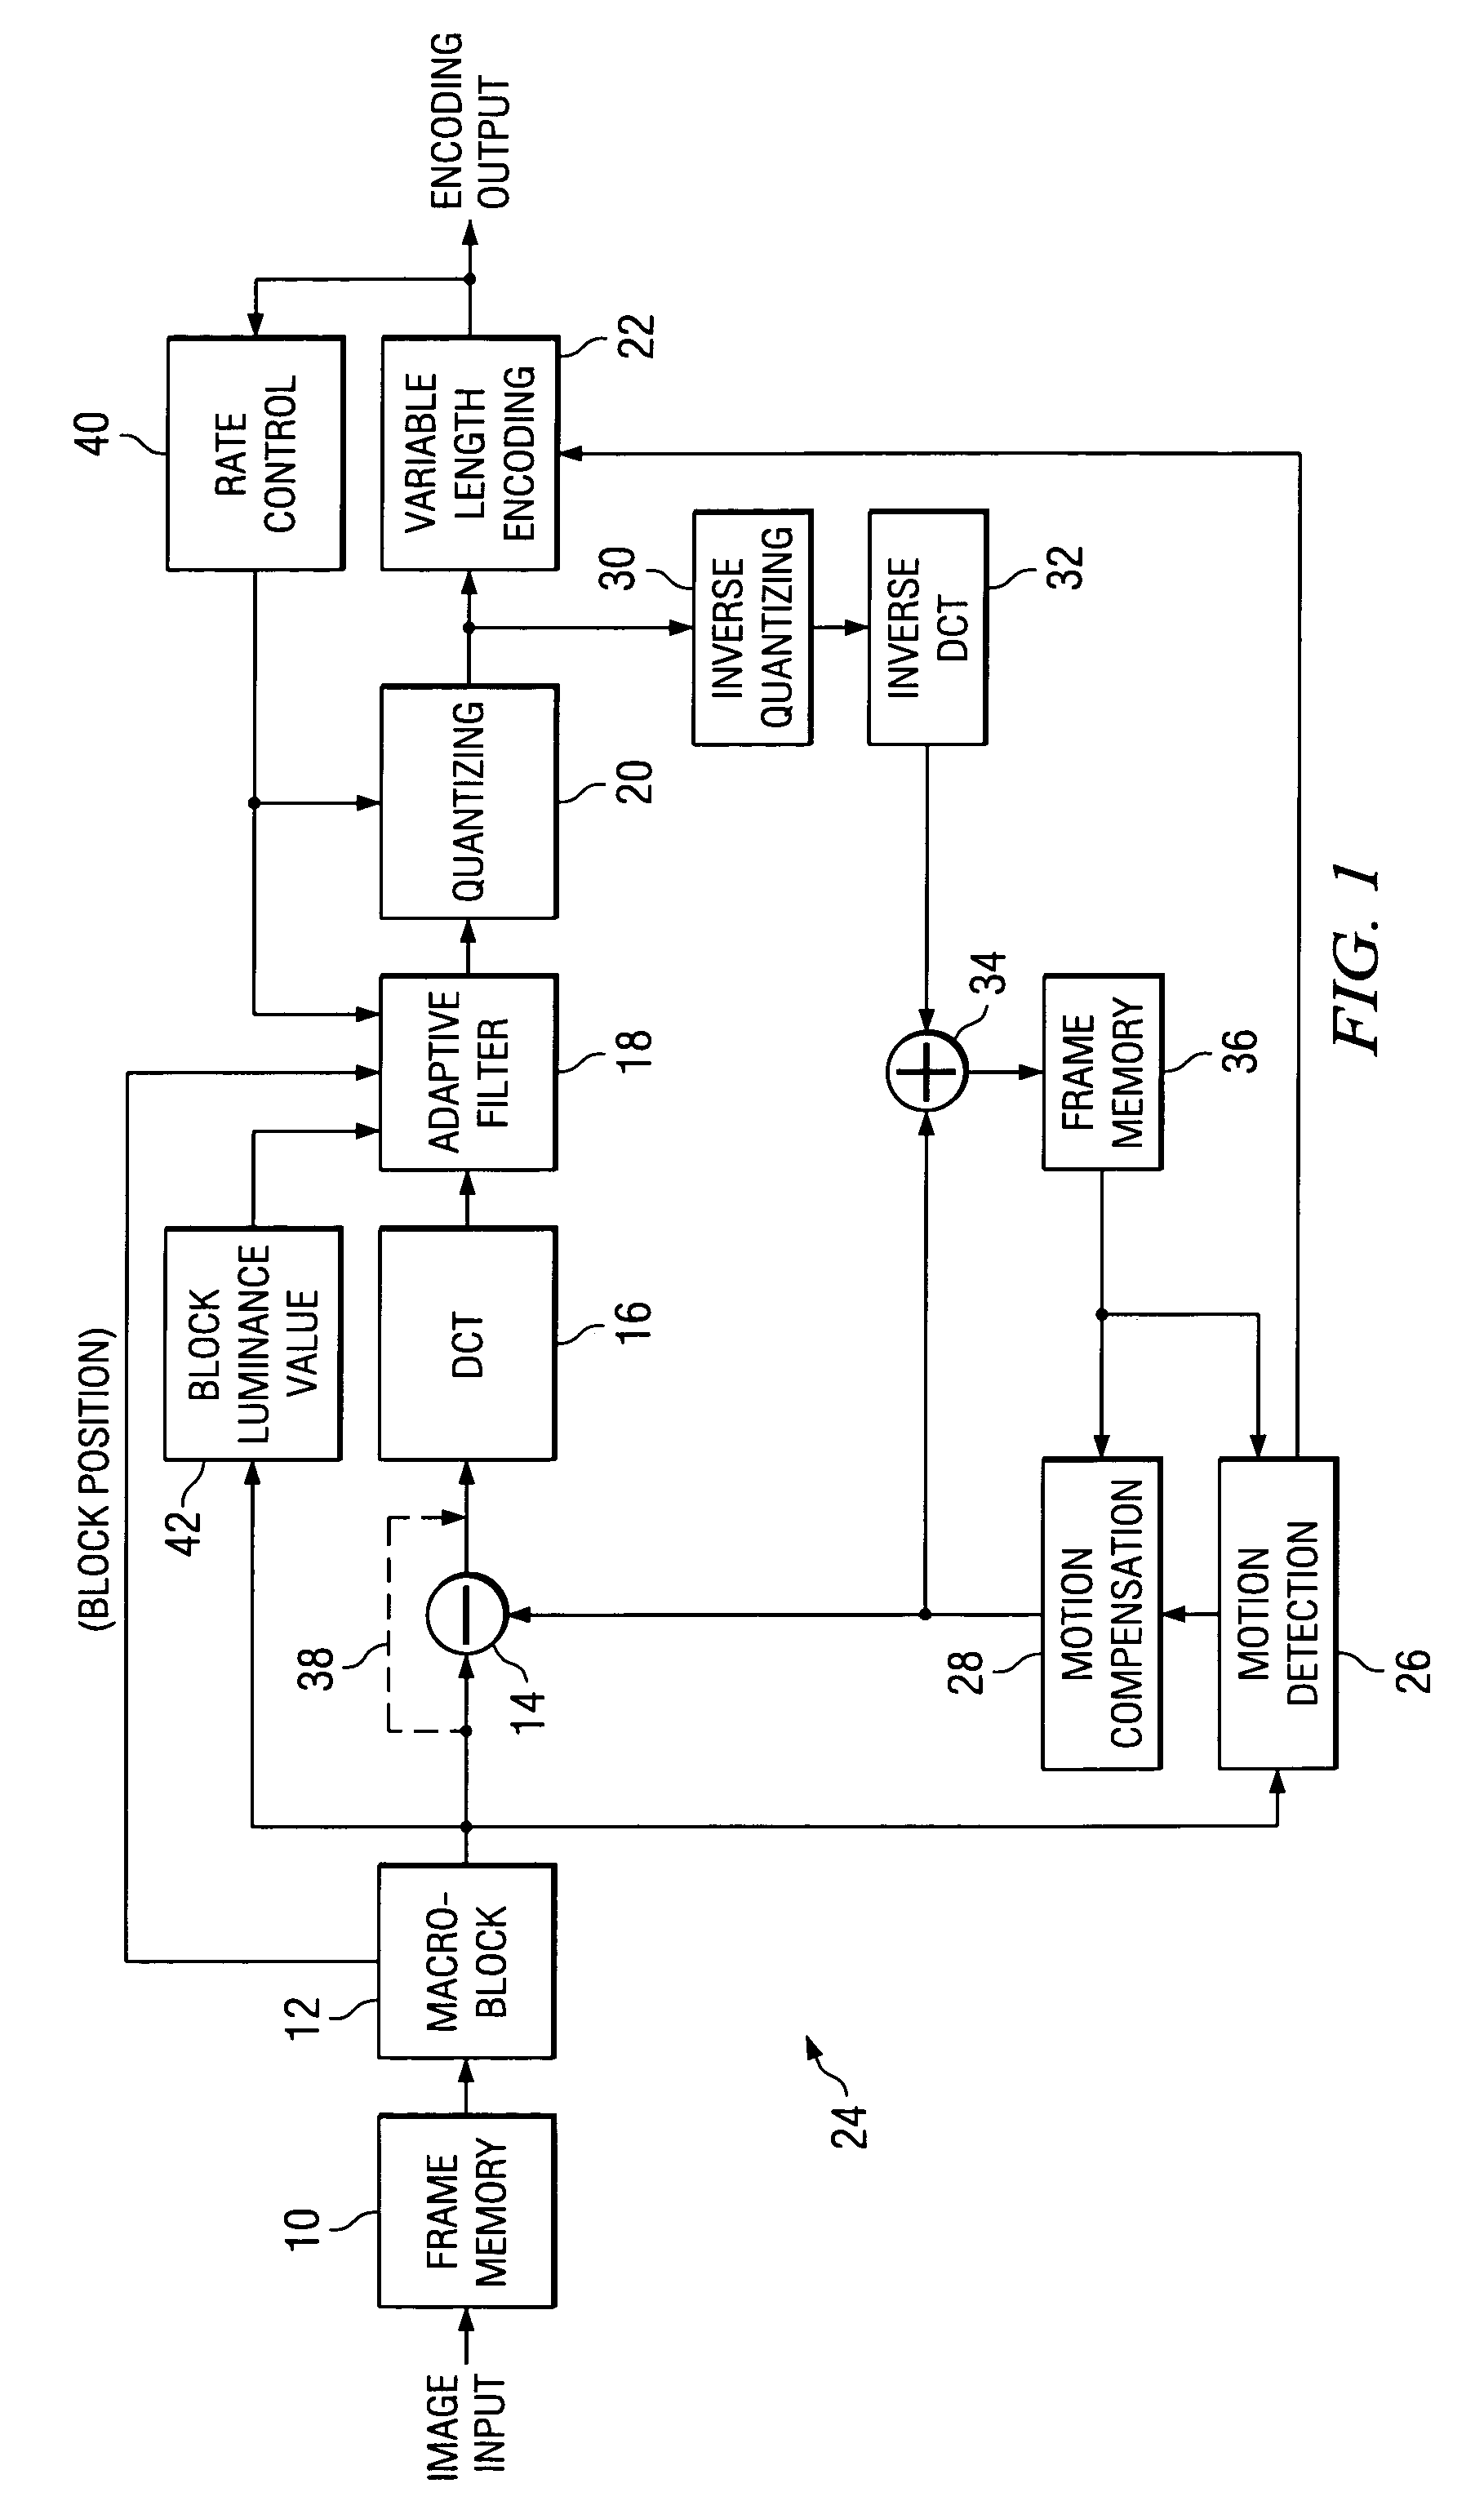 Image information compression device